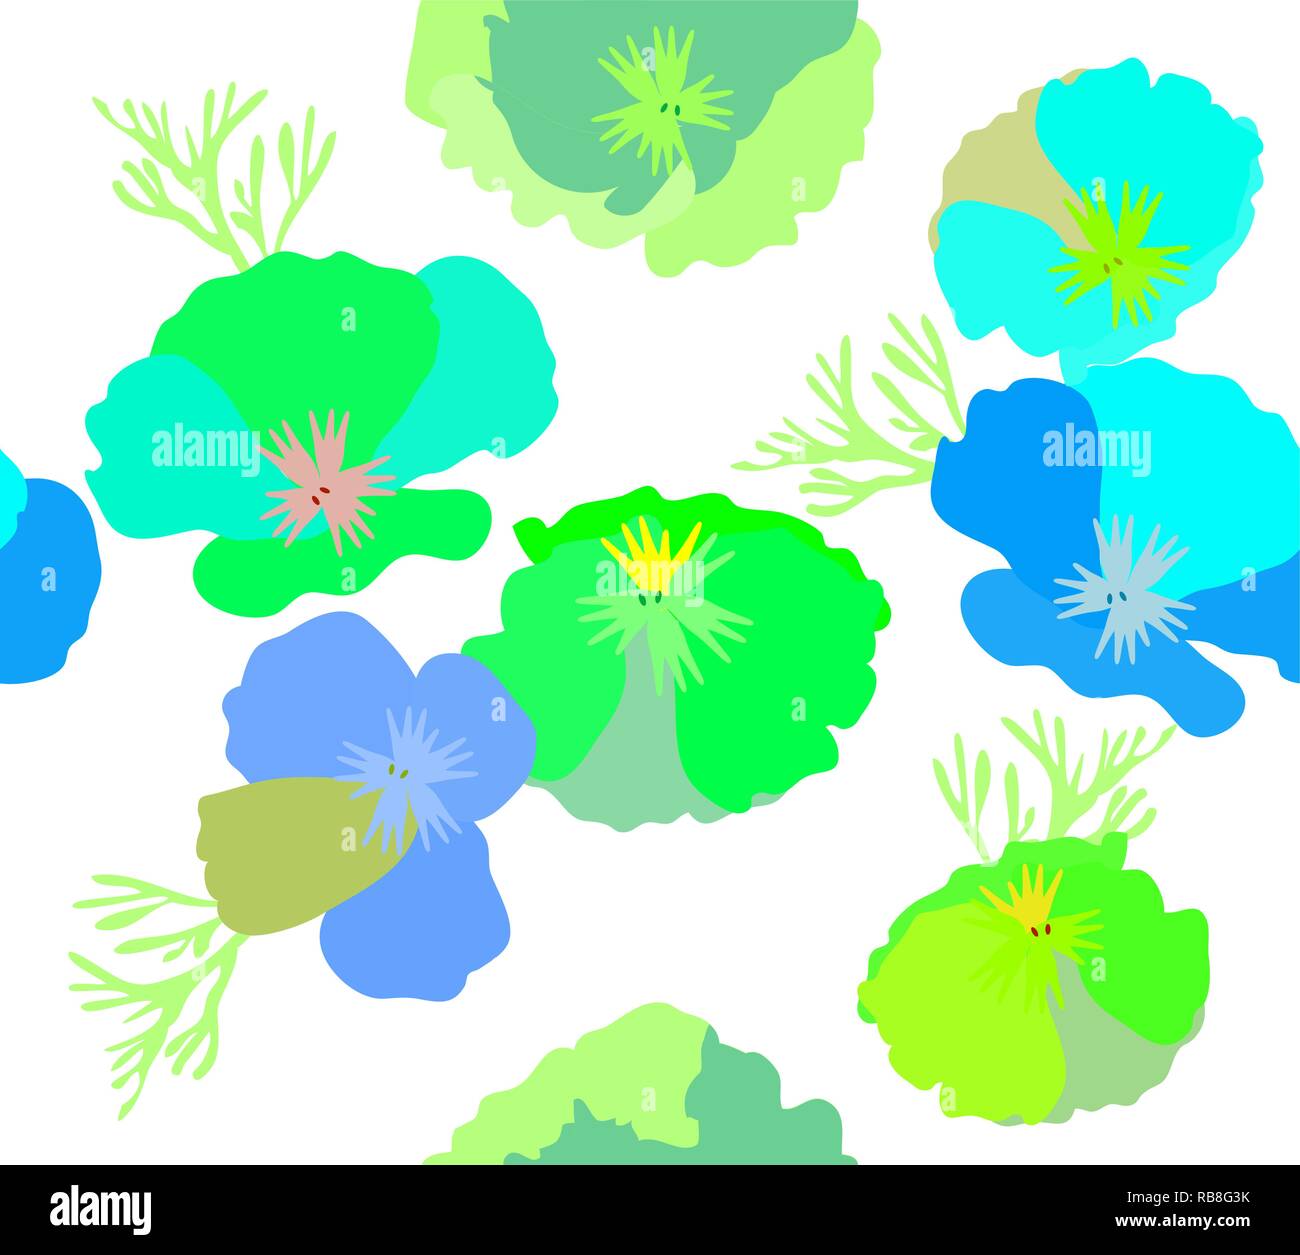 vector illustration of seamless abstract floral background. Stock Vector